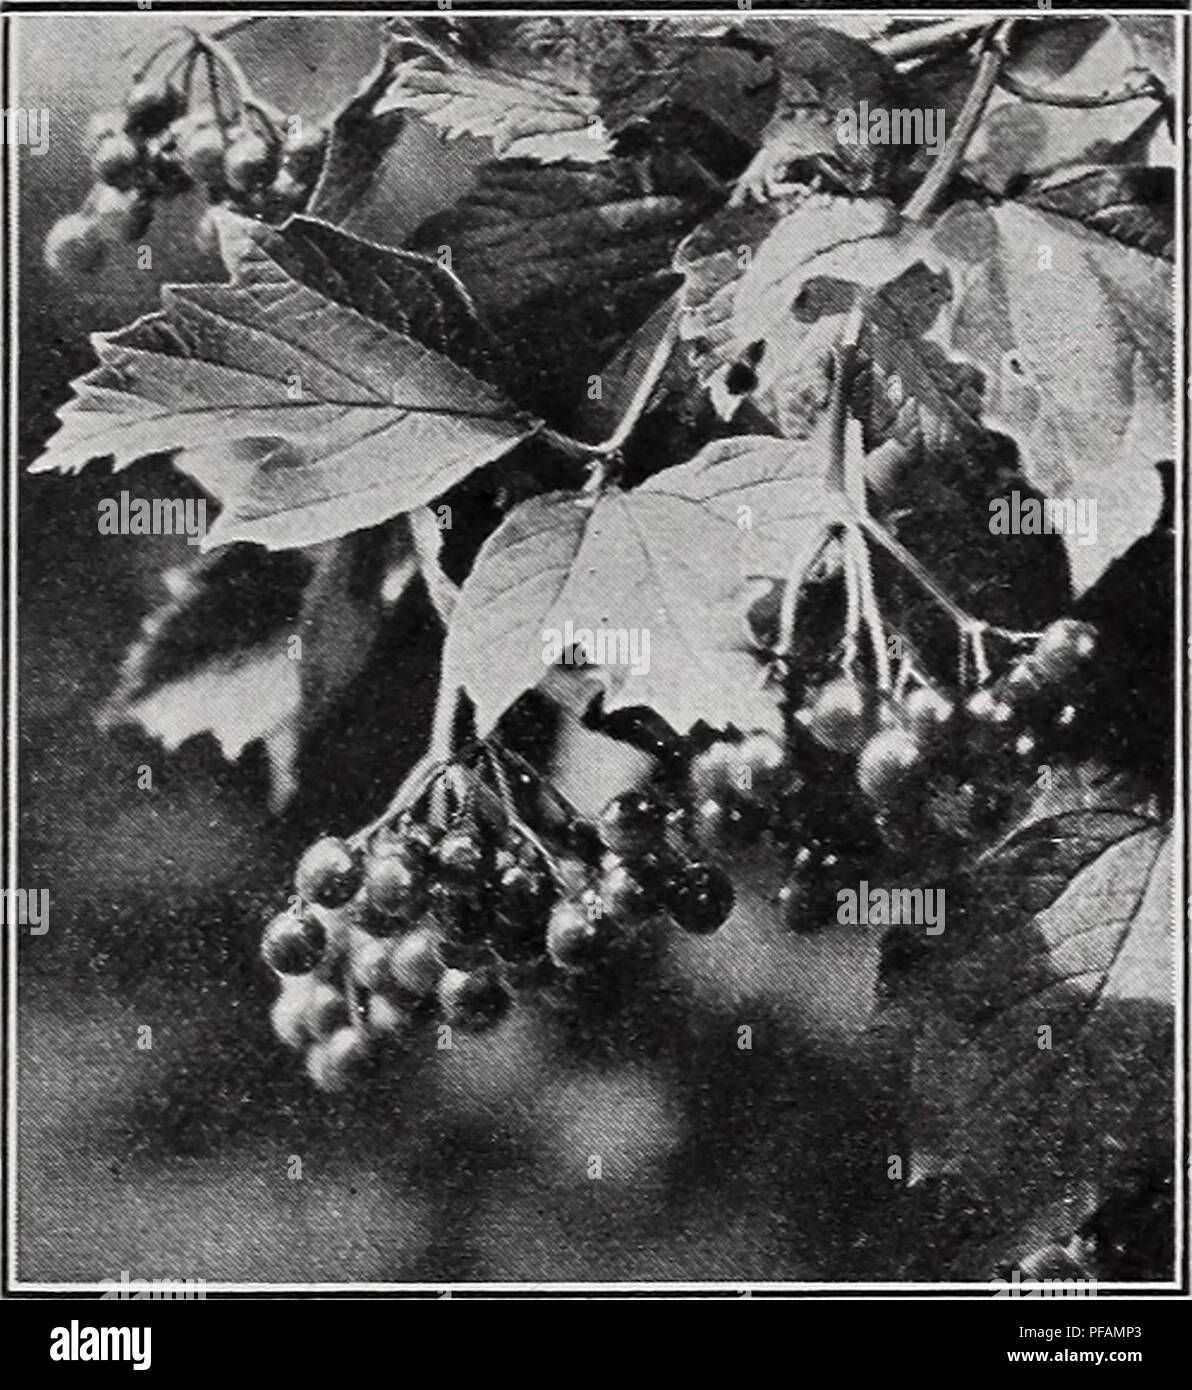 . Descriptive price list. Nurseries Horticulture Catalogs; Evergreens Catalogs; Fruit trees Catalogs; Shrubs Catalogs; Climbing plants Catalogs; Roses Catalogs. BRIDGEPORT NURSERIES, Bridgeport, Indiana 23. Fruit and Foliage of American Cranberry Bush. Tamarix TAMARIX africana. A beautiful shrub with small feathery foliage similar to the juniper. Delicate small pink flowers. Blooms in May and grows 10 to 15 feet high. Each 10 100 3 to 4 ft S0.50 S4.00 $25.00 4 to 5 ft 60 5.00 30.00 5 to 6 ft 75 6.00 40.00 T. amurensis. Growth is slender and graceful with silvery foliage. Pink flowers are borne Stock Photo